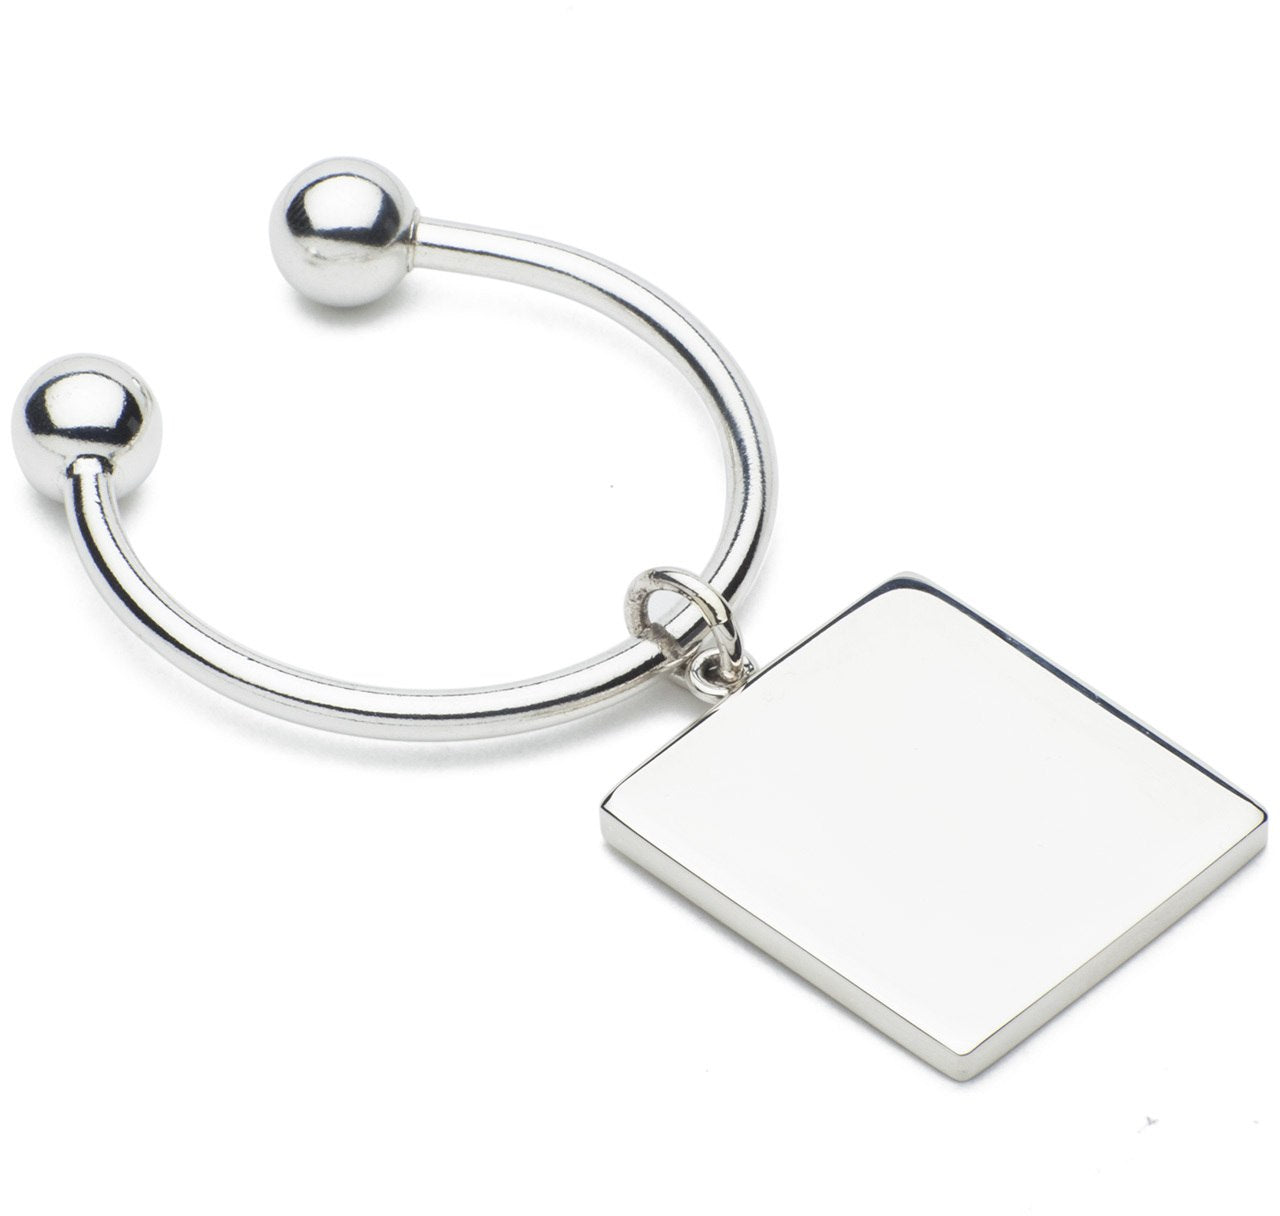 Sir Jack's Sterling Silver Ball & Square Key Ring